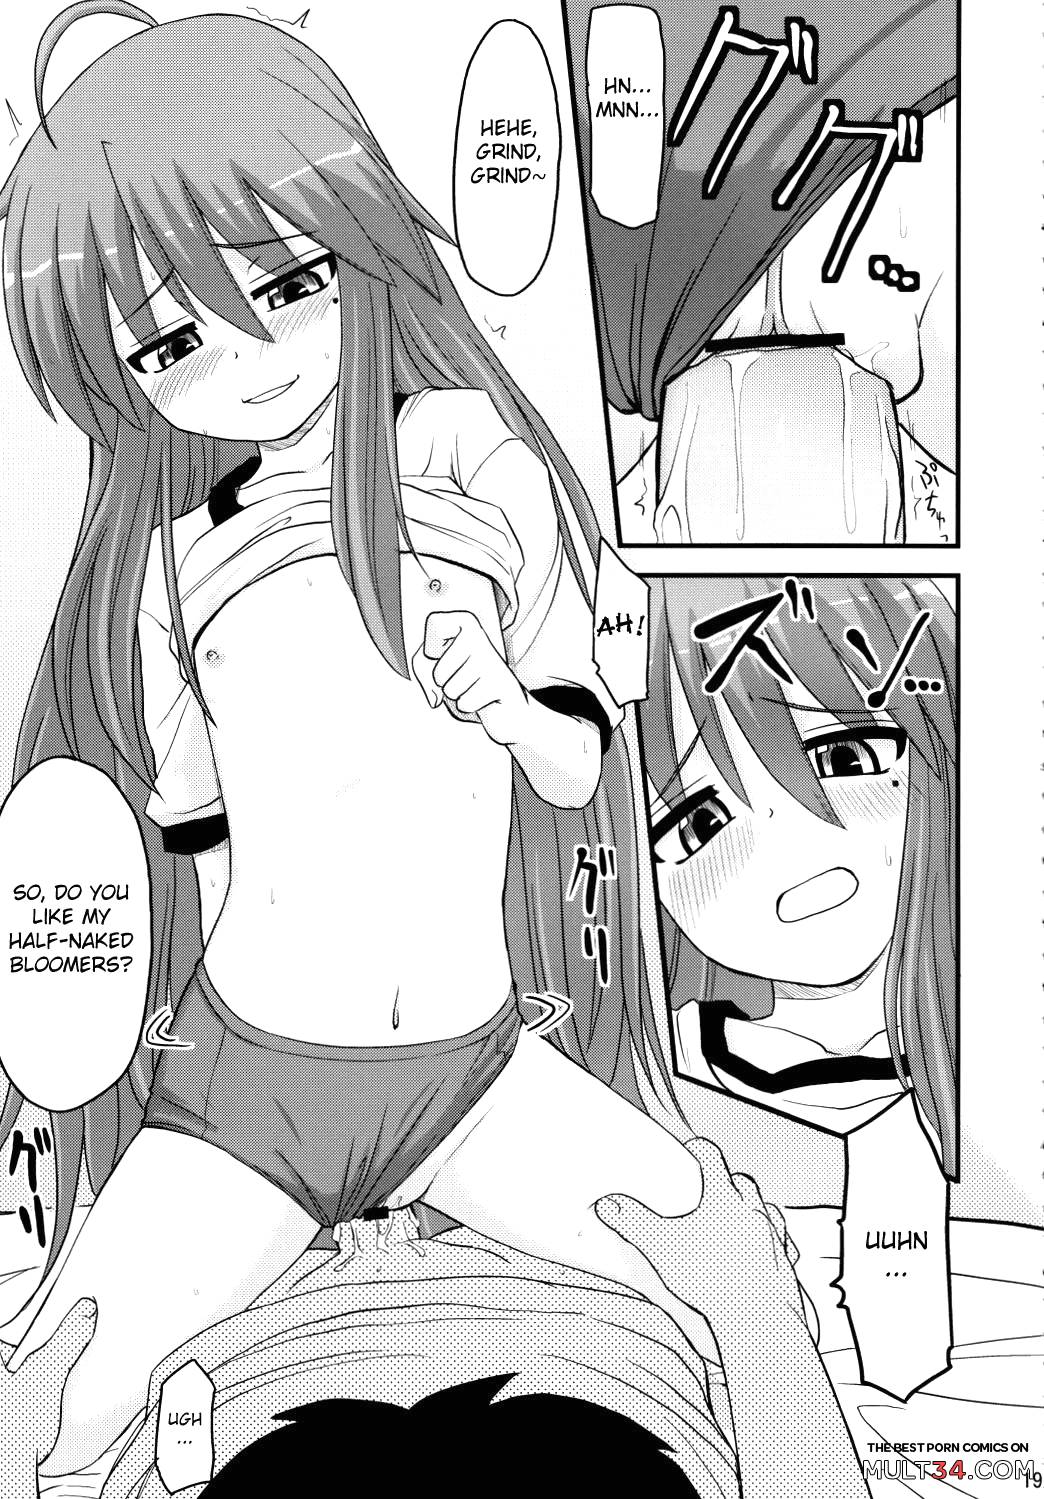 Konata and Oh-zu 4 people each and every one + 1 page 15